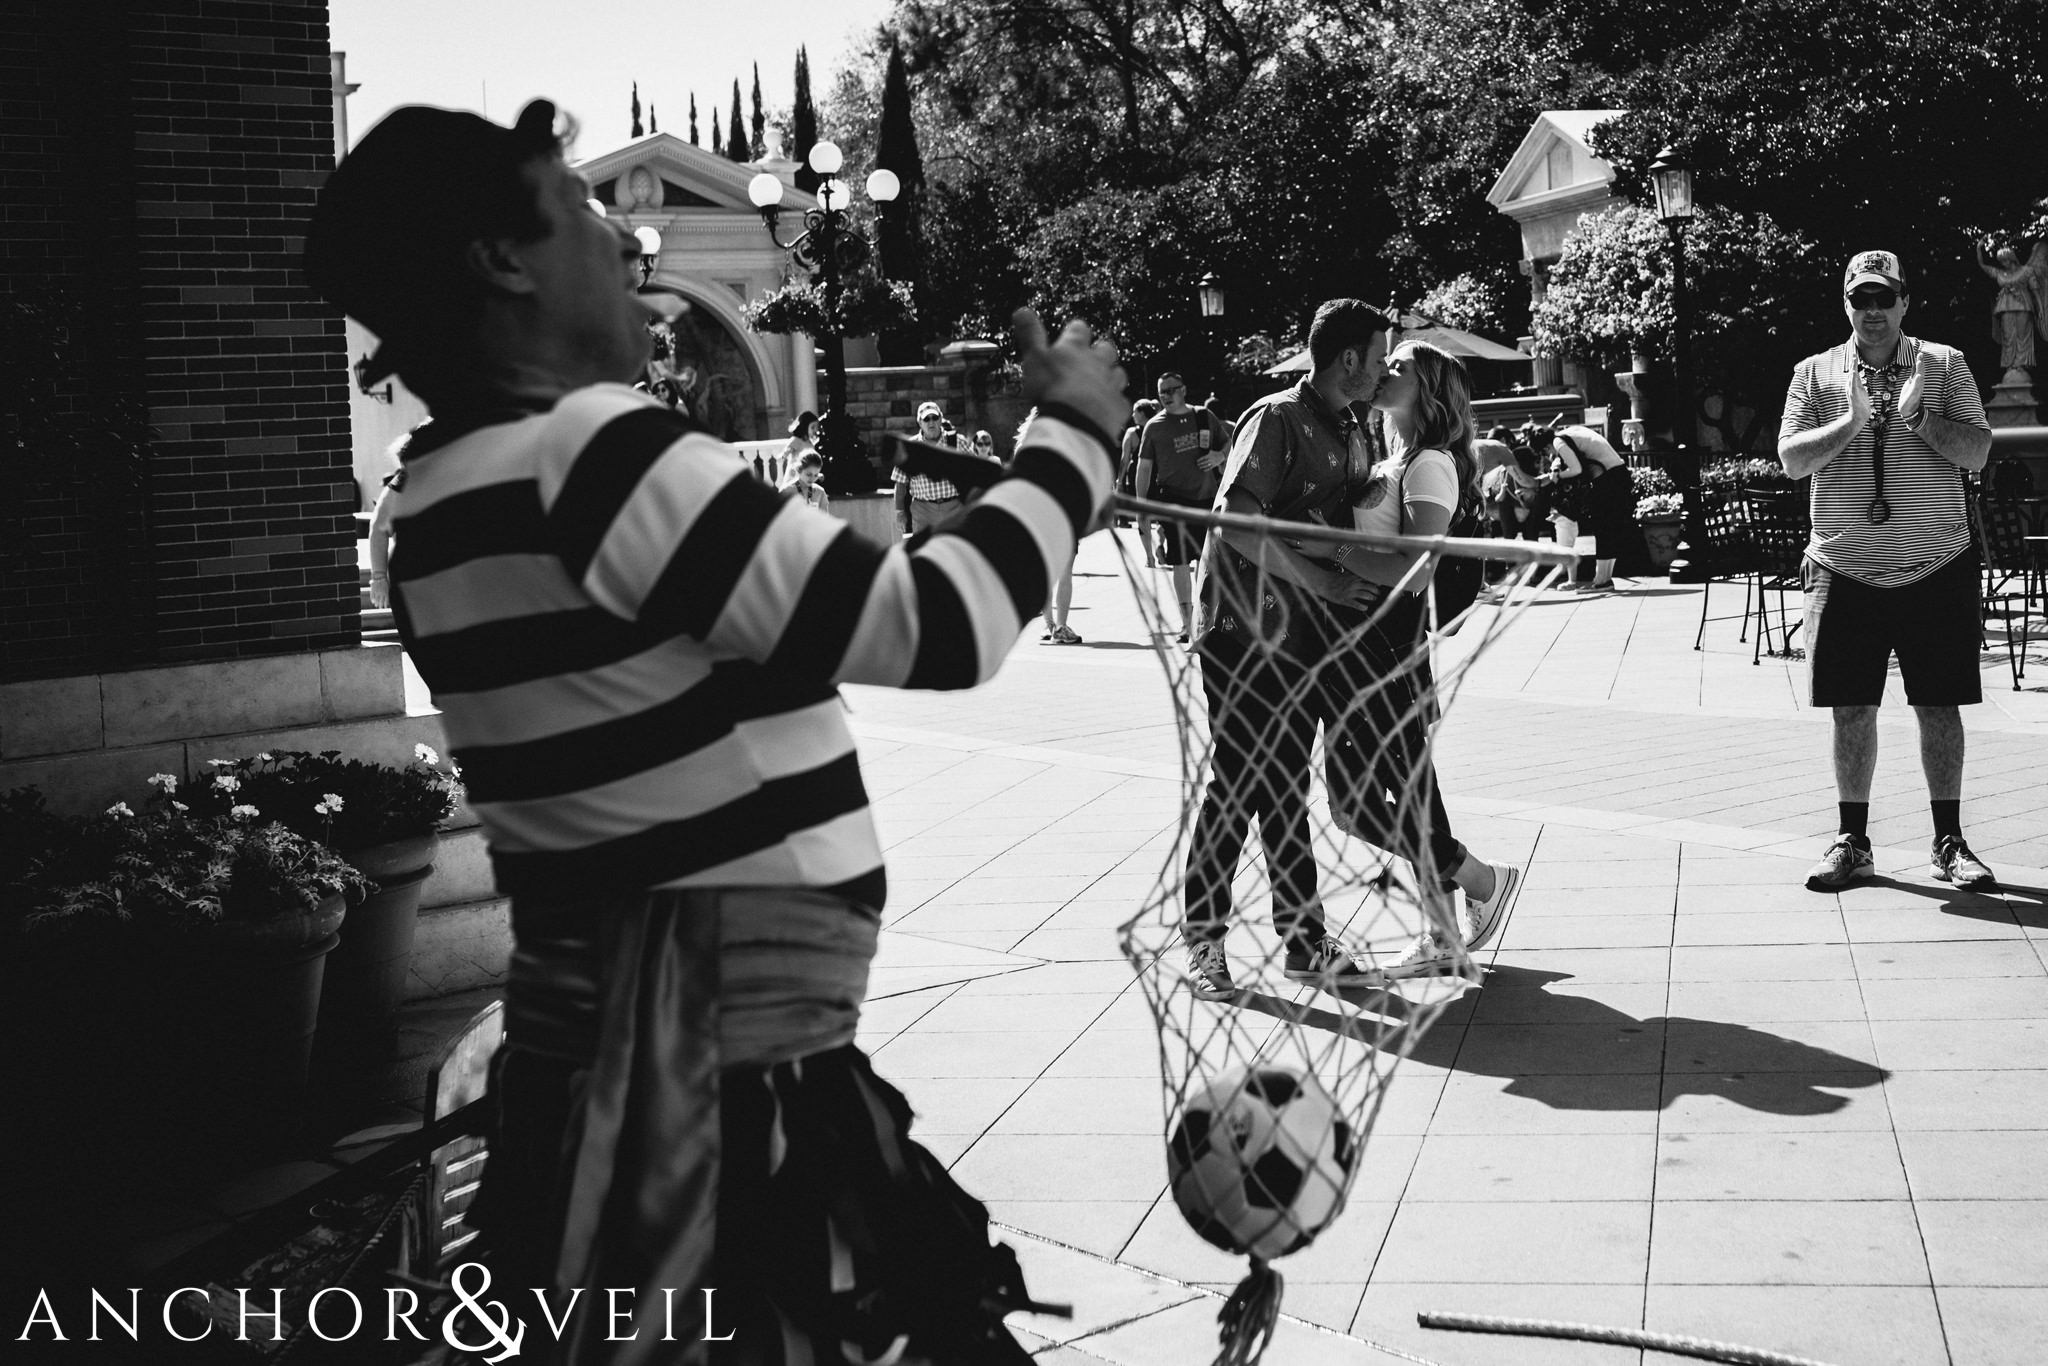 italian mime during their Disney world engagement session at Disney's Epcot